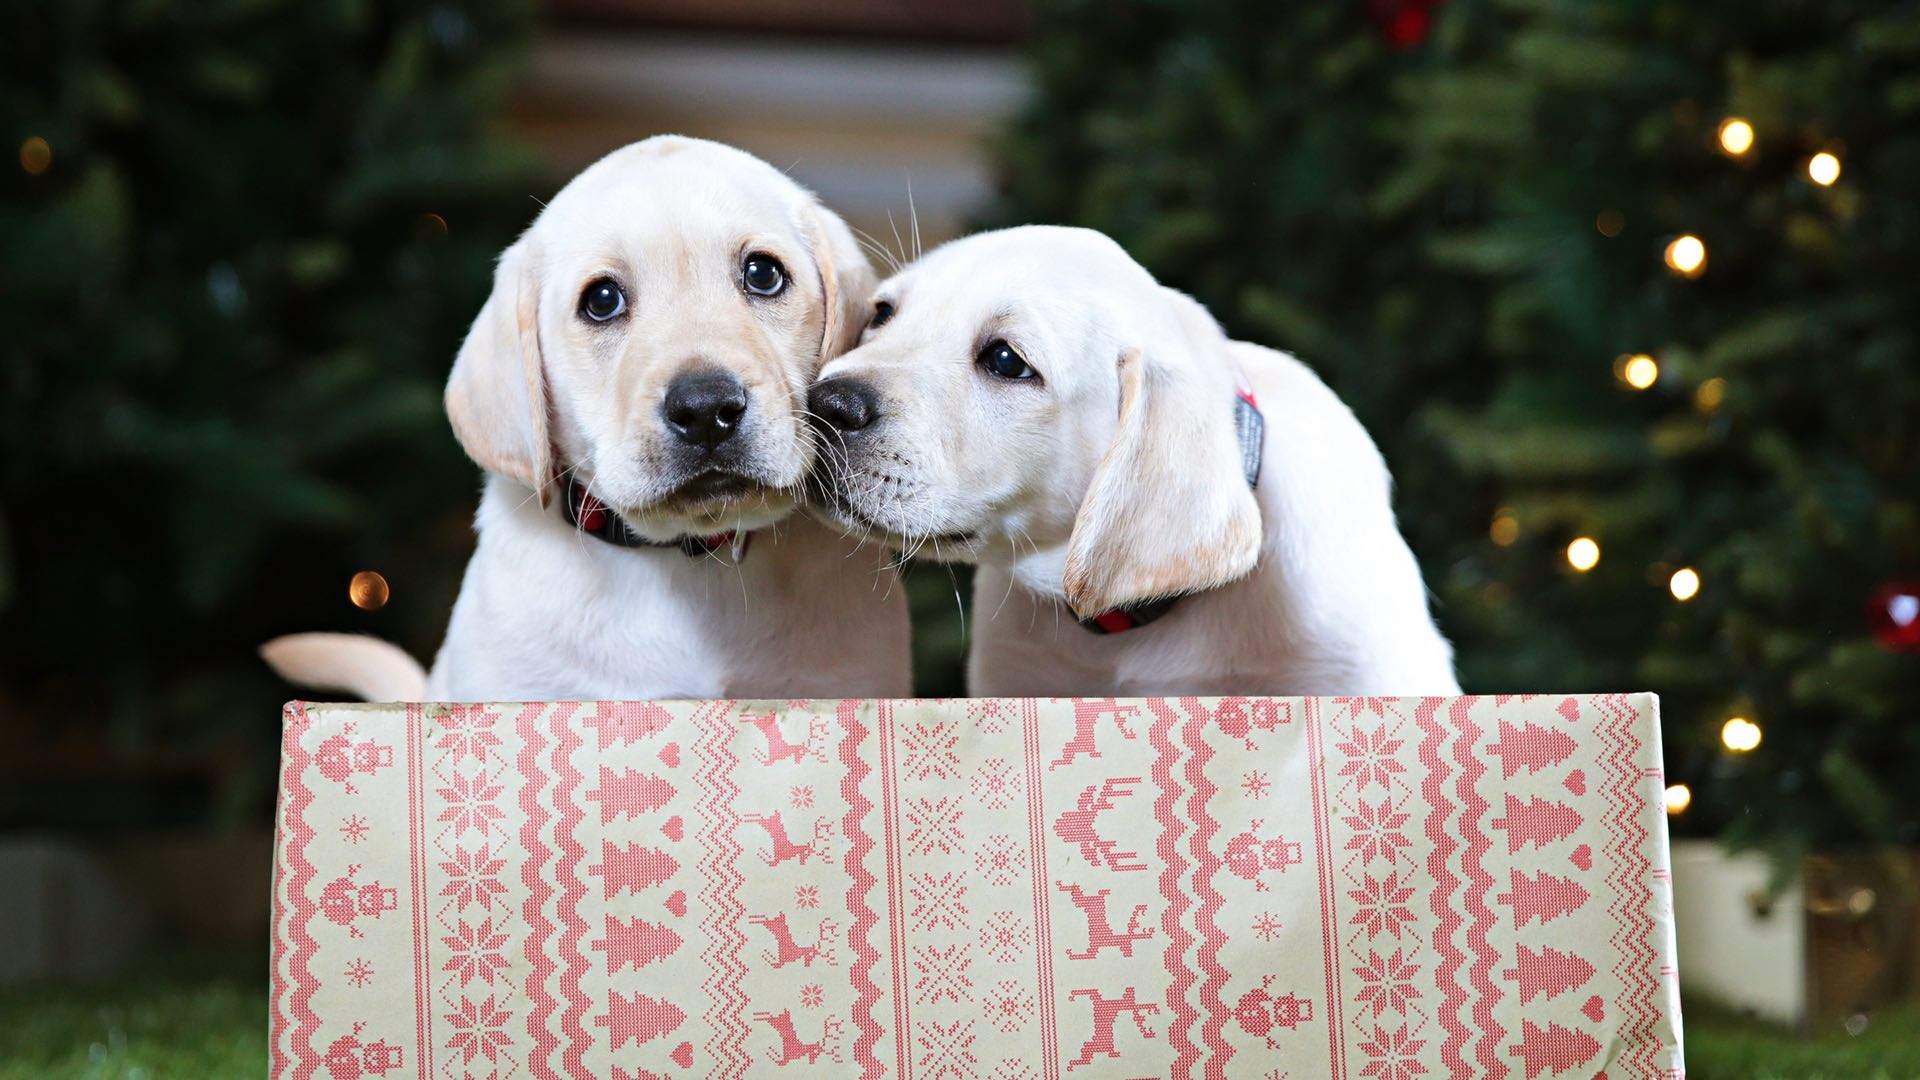 Sydney, You're Up: Guide Dogs NSW Needs You to Look After These Fresh New Pups